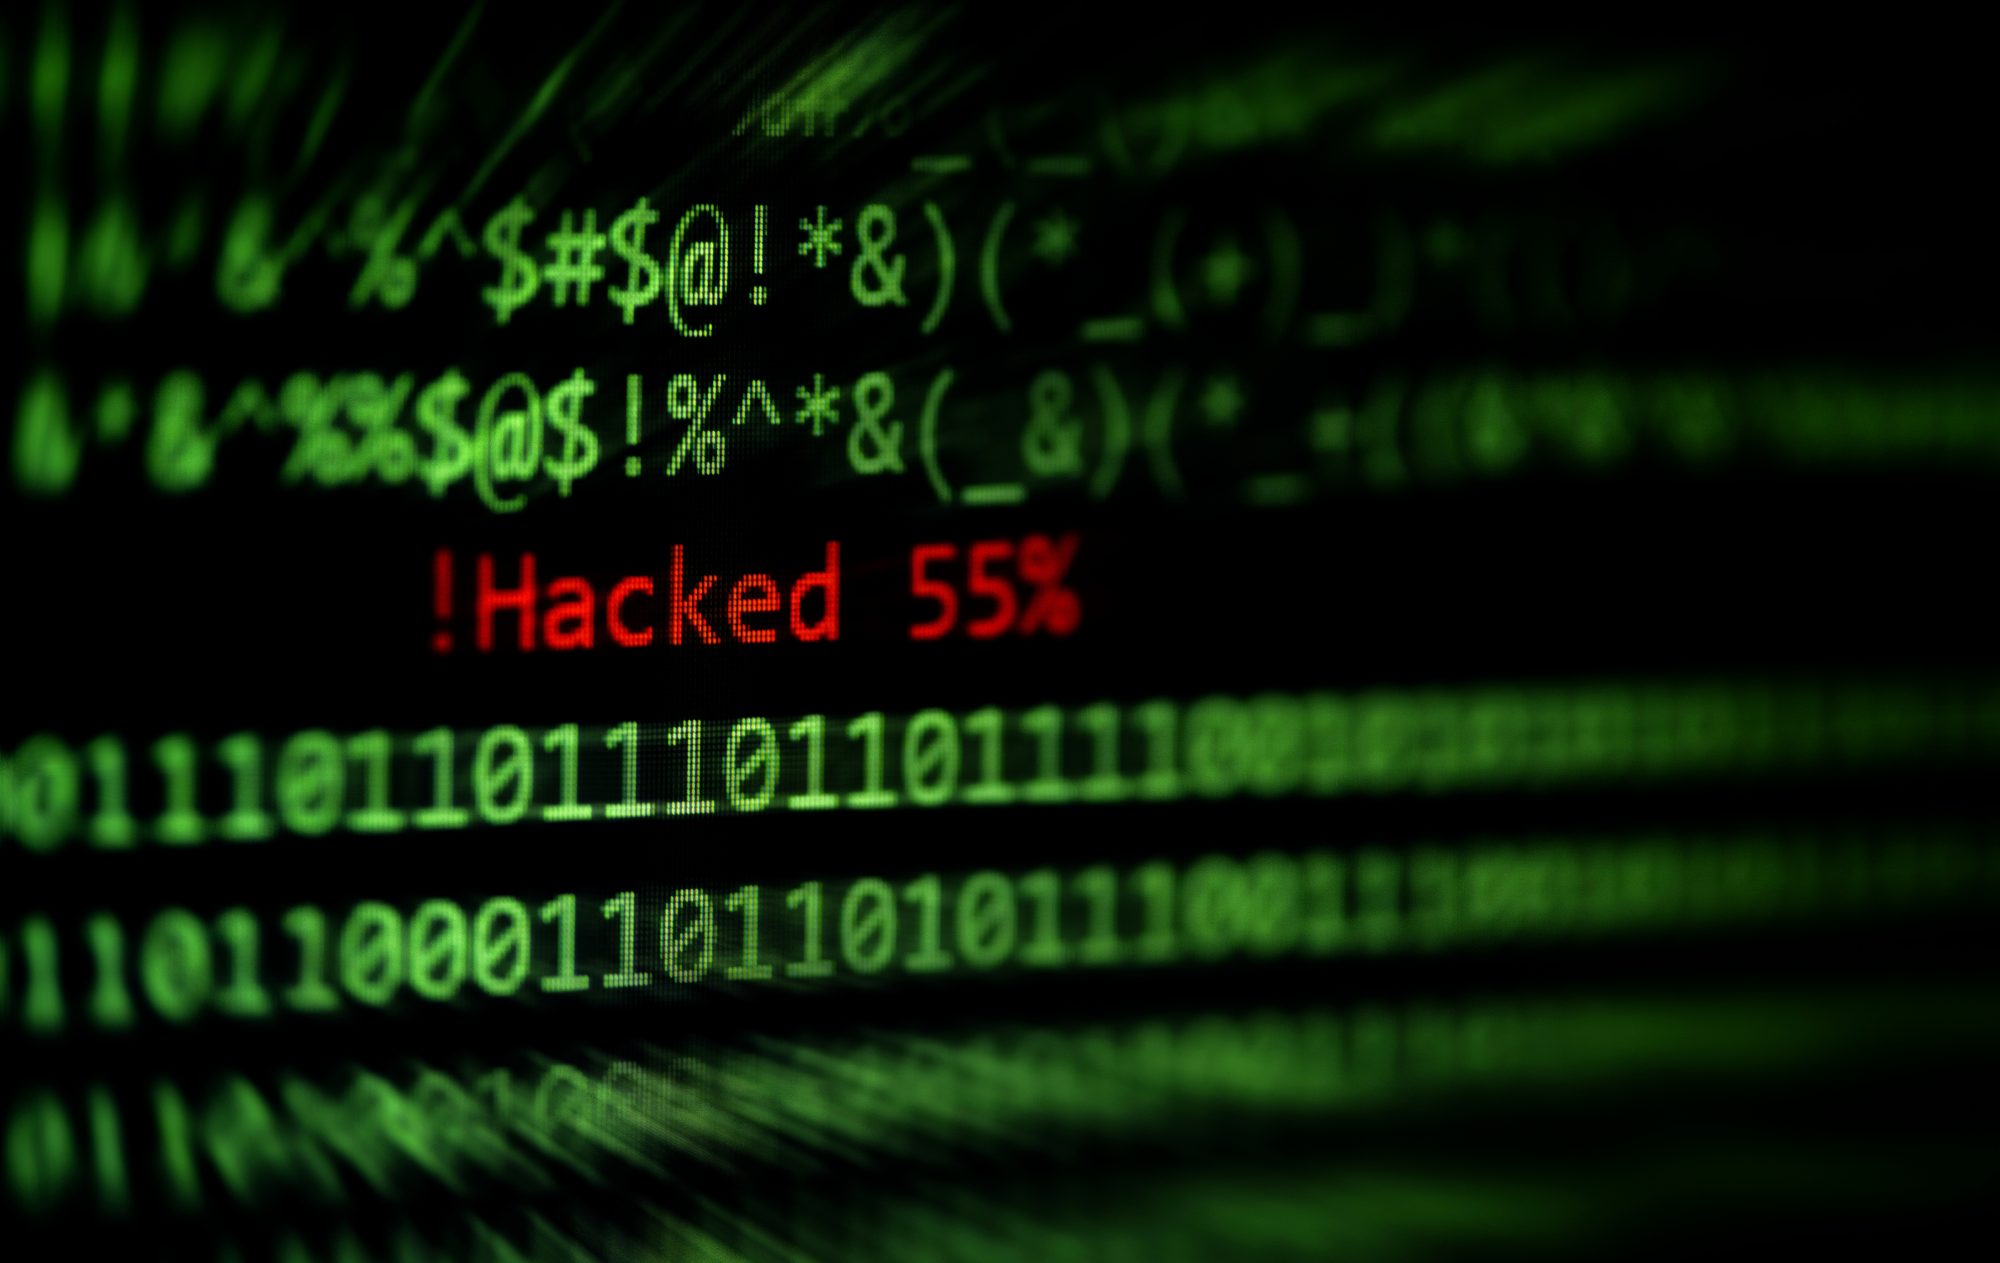 Hacking back: The dangers of offensive cyber security